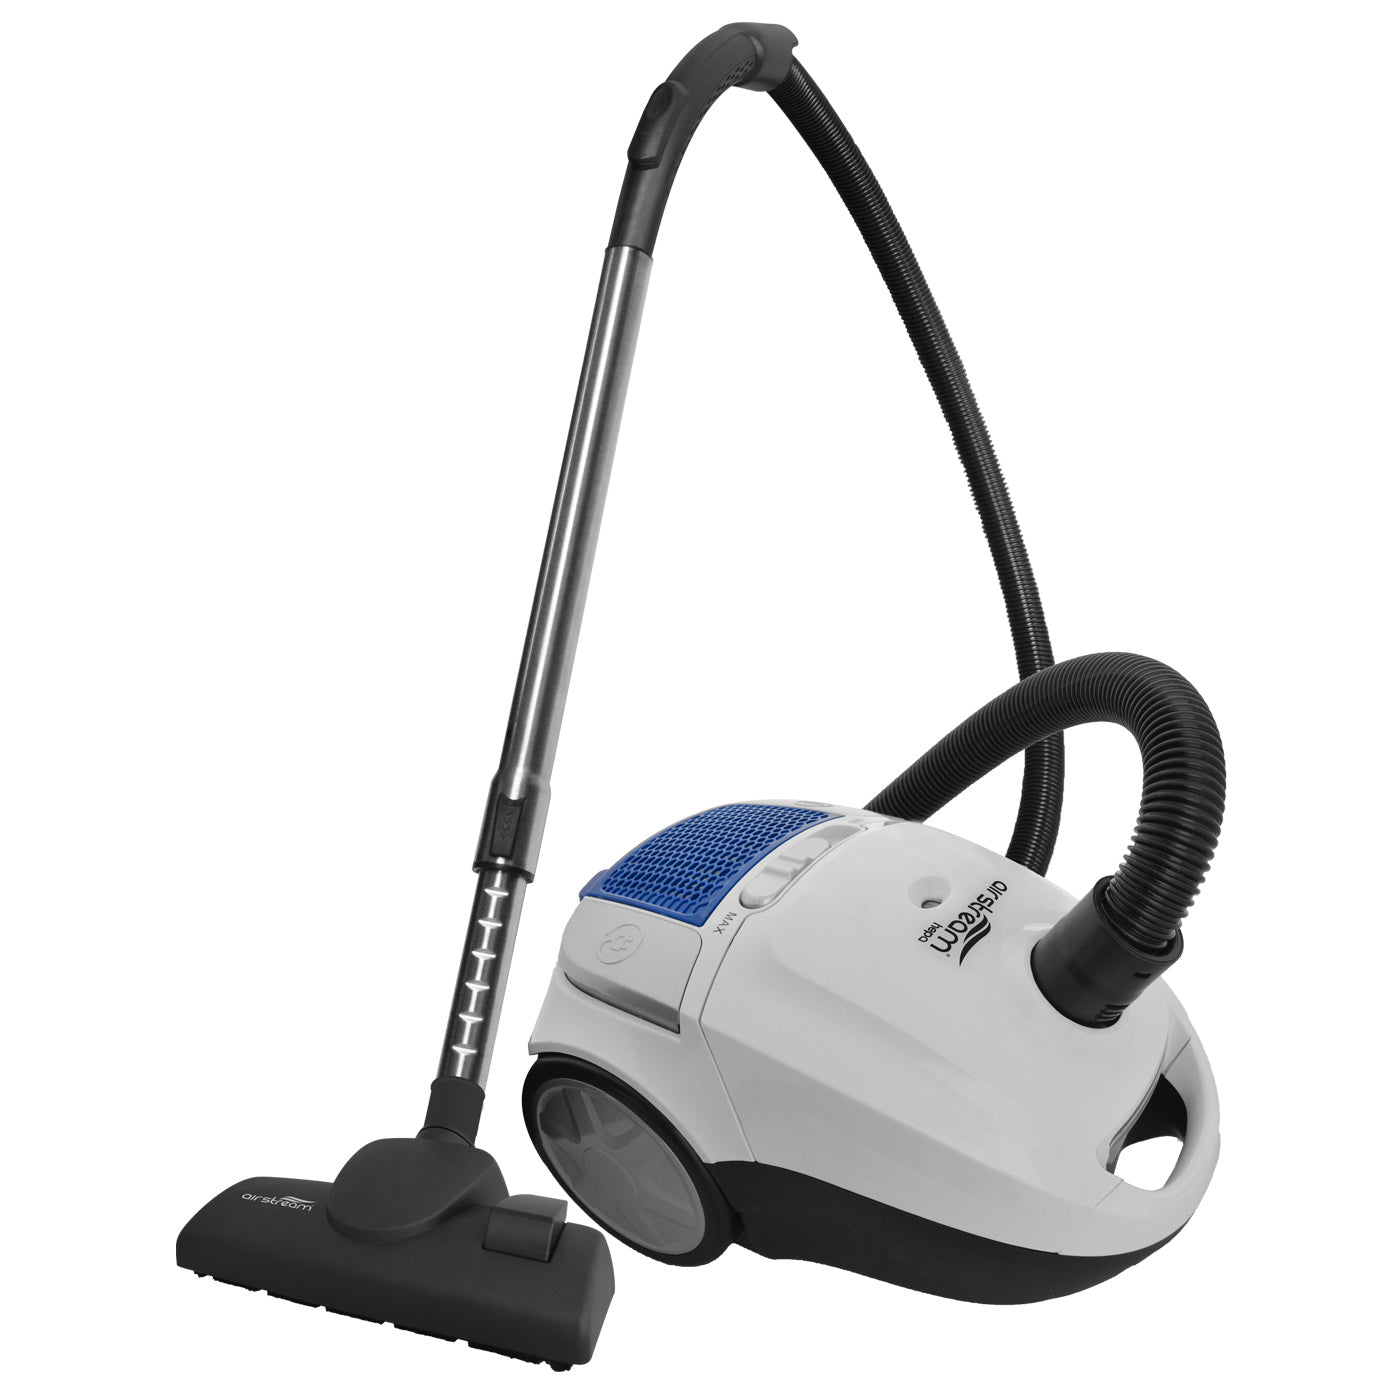 Airstream AS100, 1200 watts. Compact-size canister vacuum